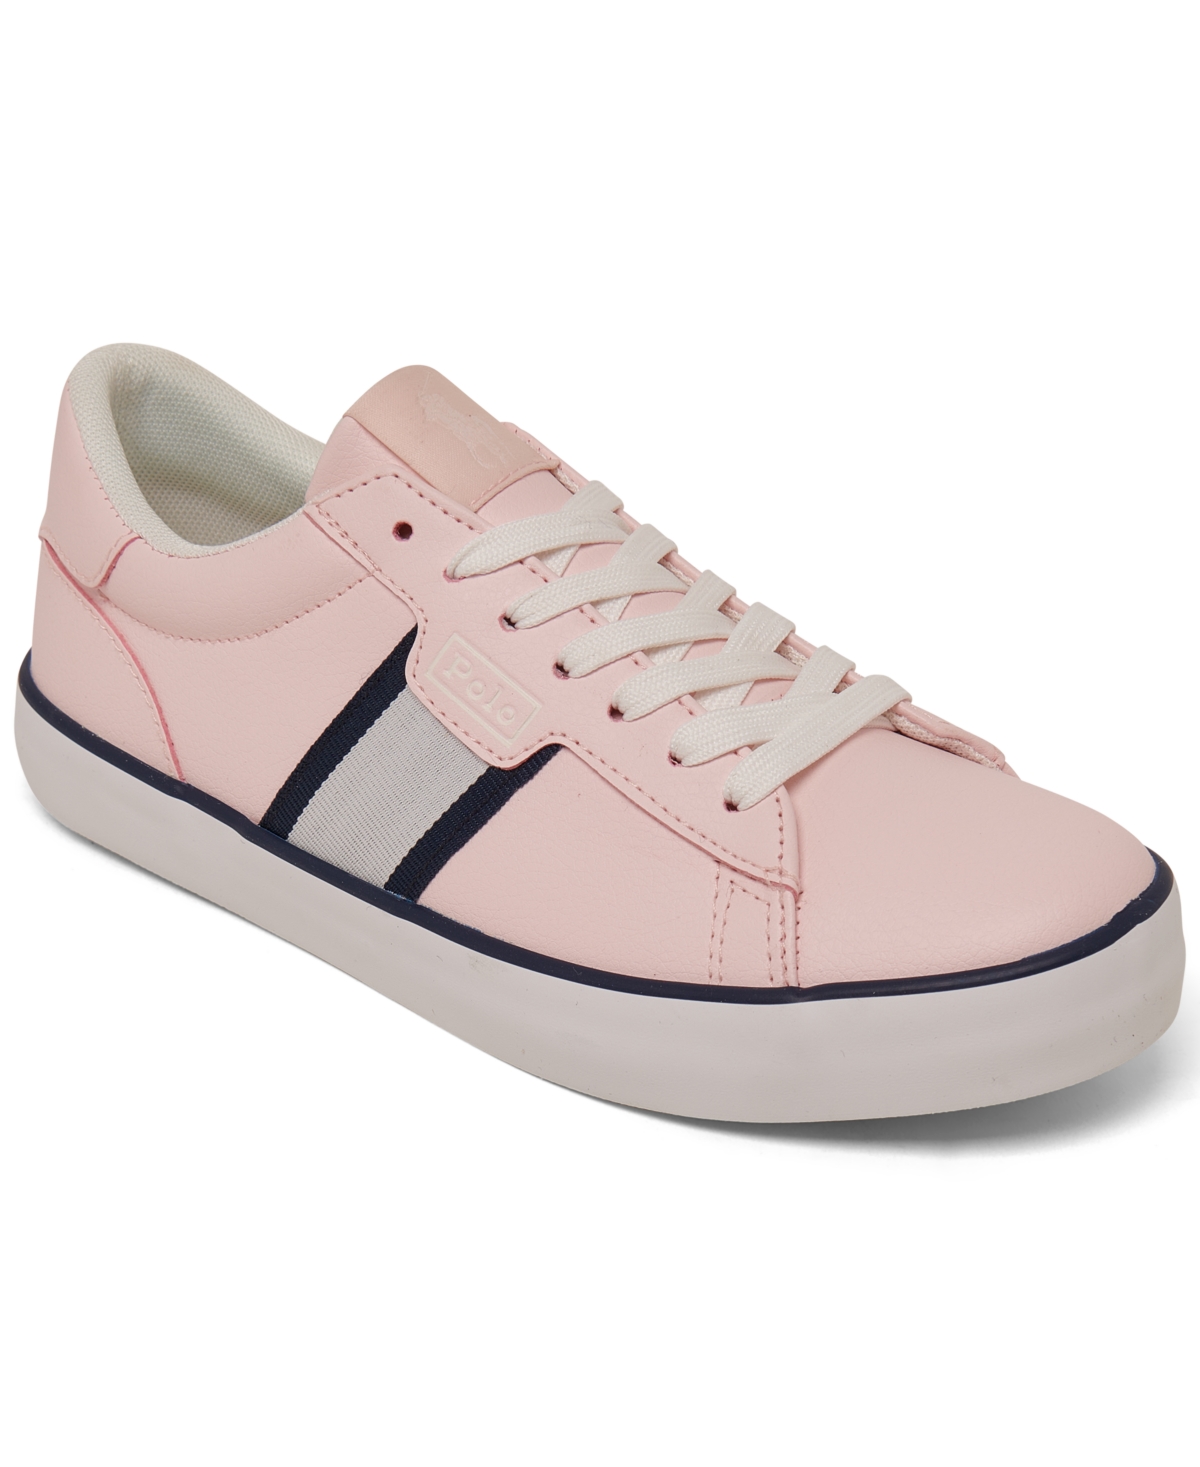 Polo Ralph Lauren Big Girls' Rexley Casual Sneakers From Finish Line In Light Pink,navy,white